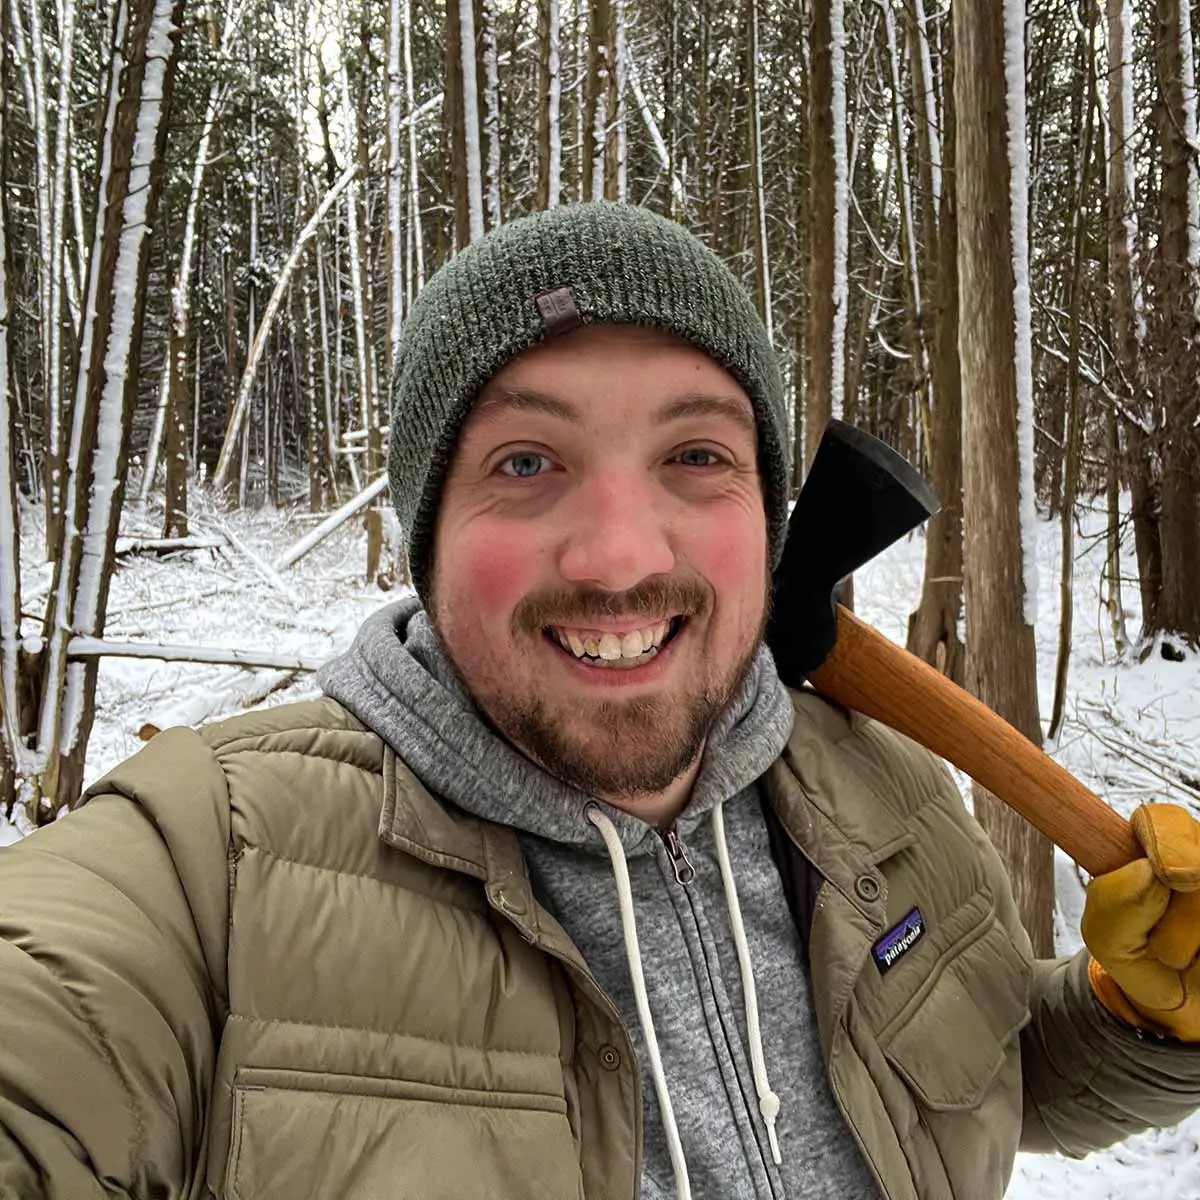 Jim of axeandtool.com in the woods with axe